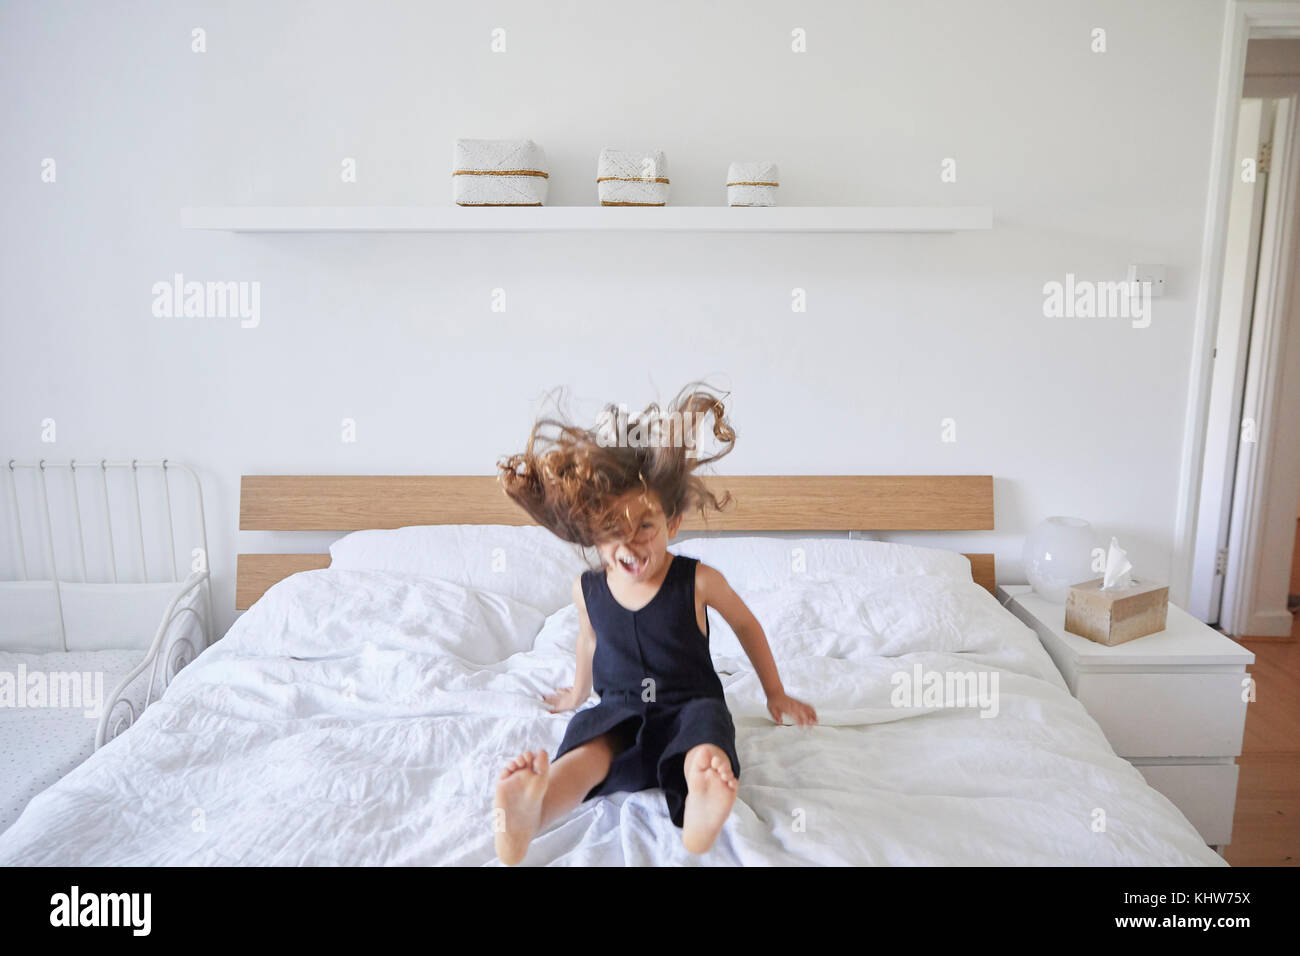 Young girl jumping on bed Stock Photo